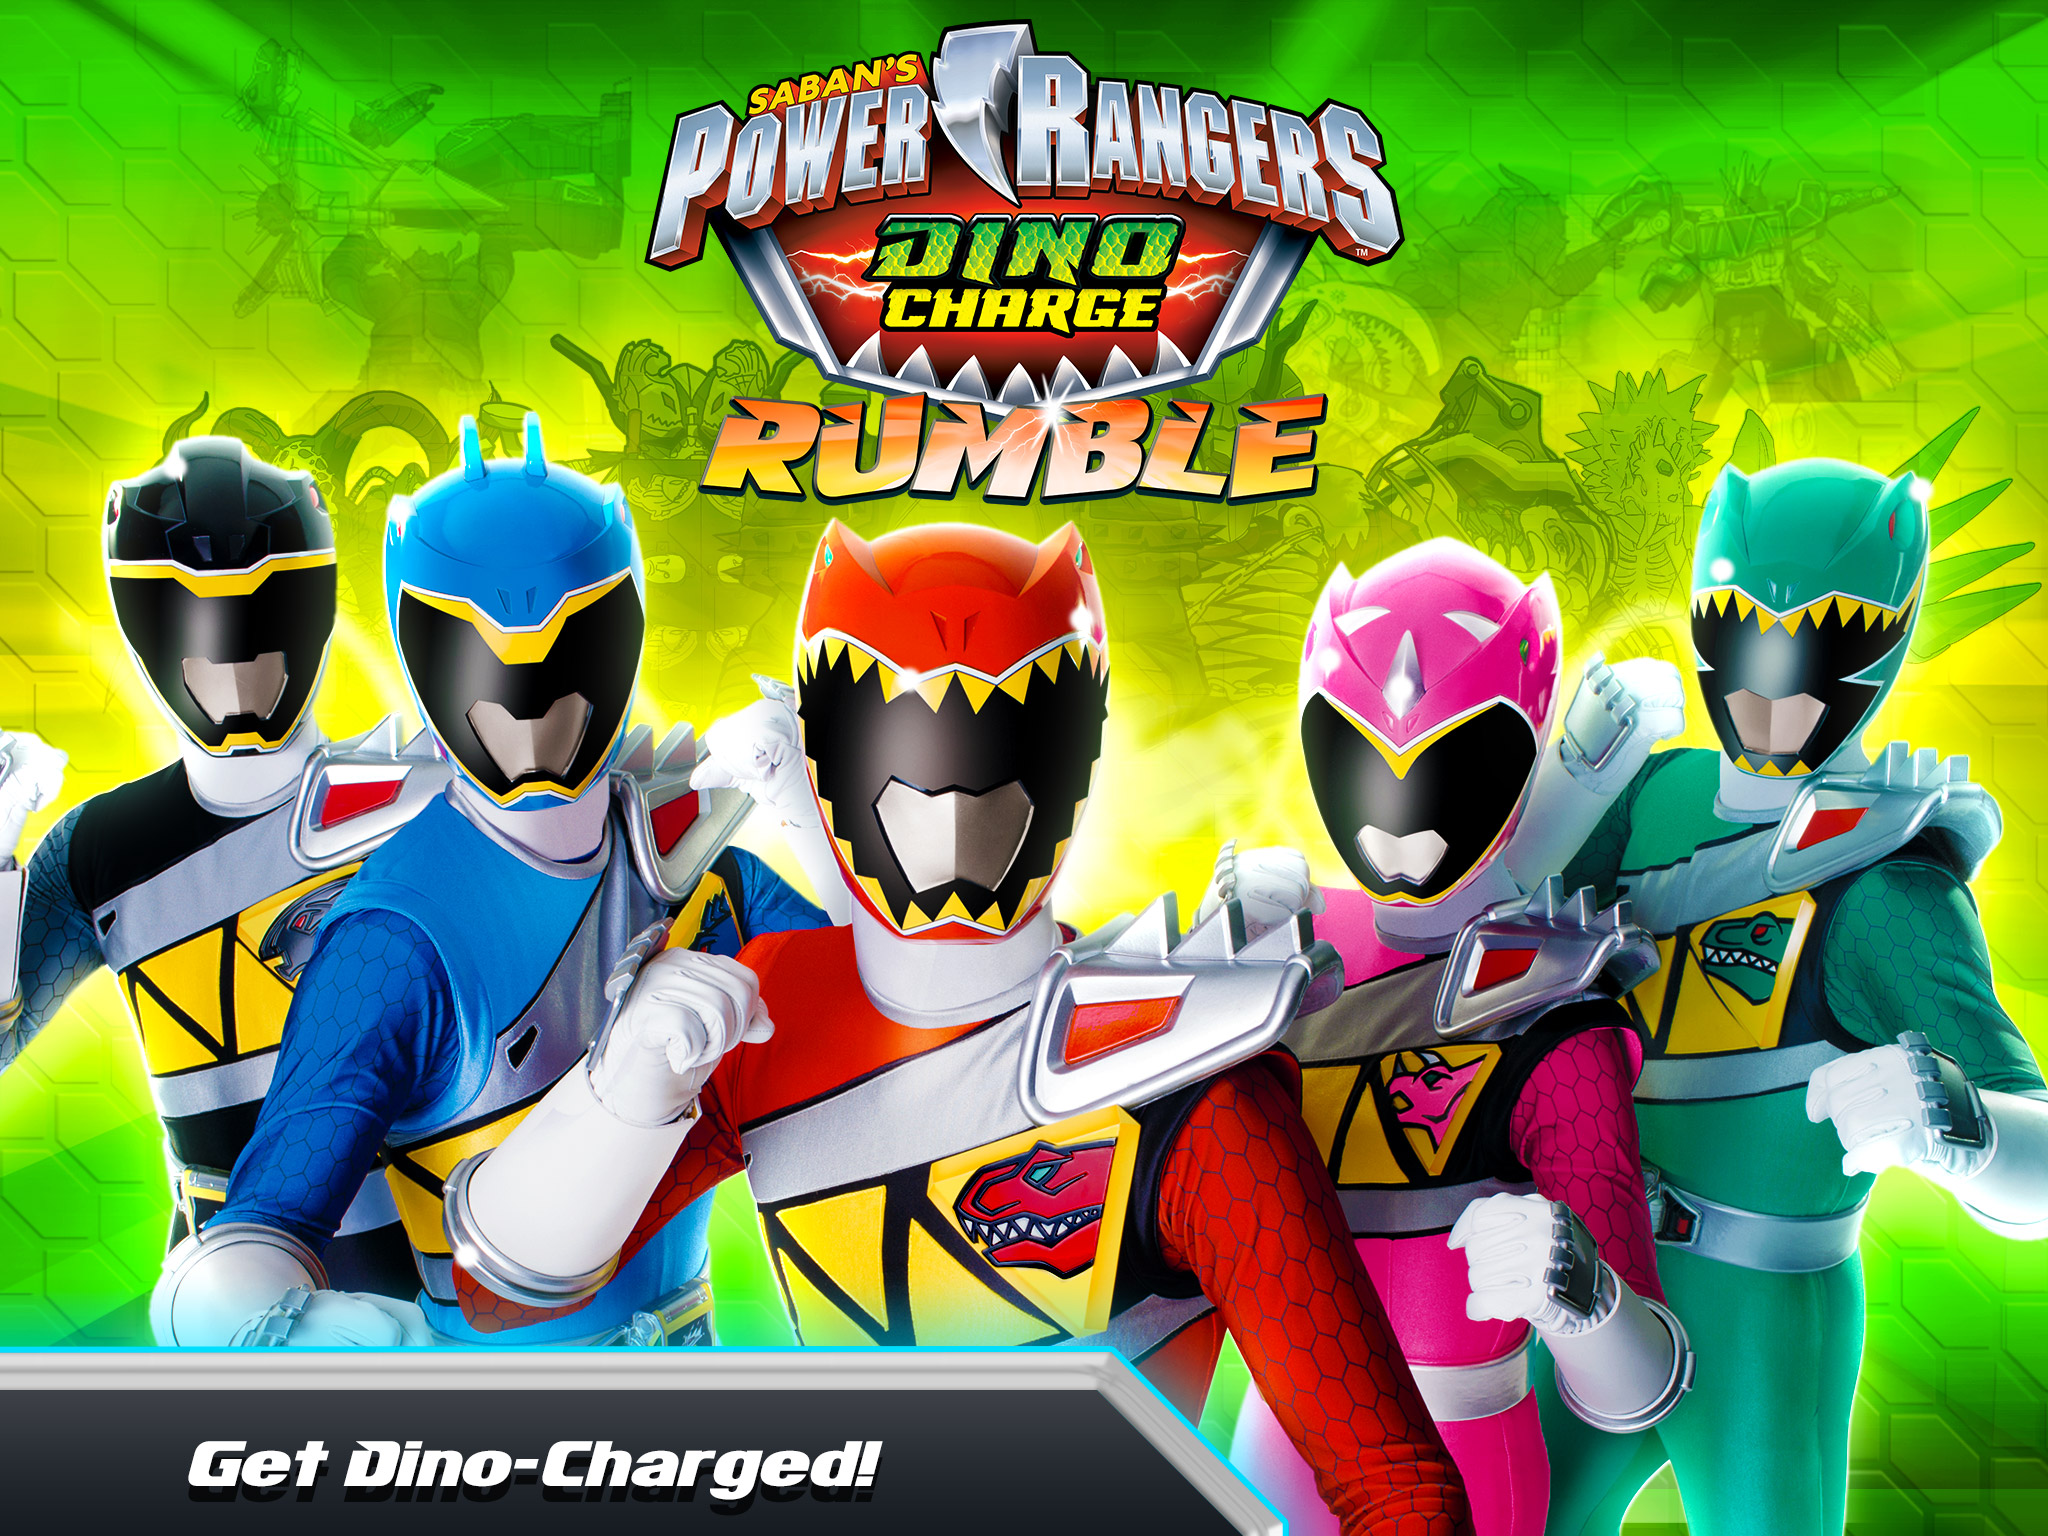 power rangers games free for pc